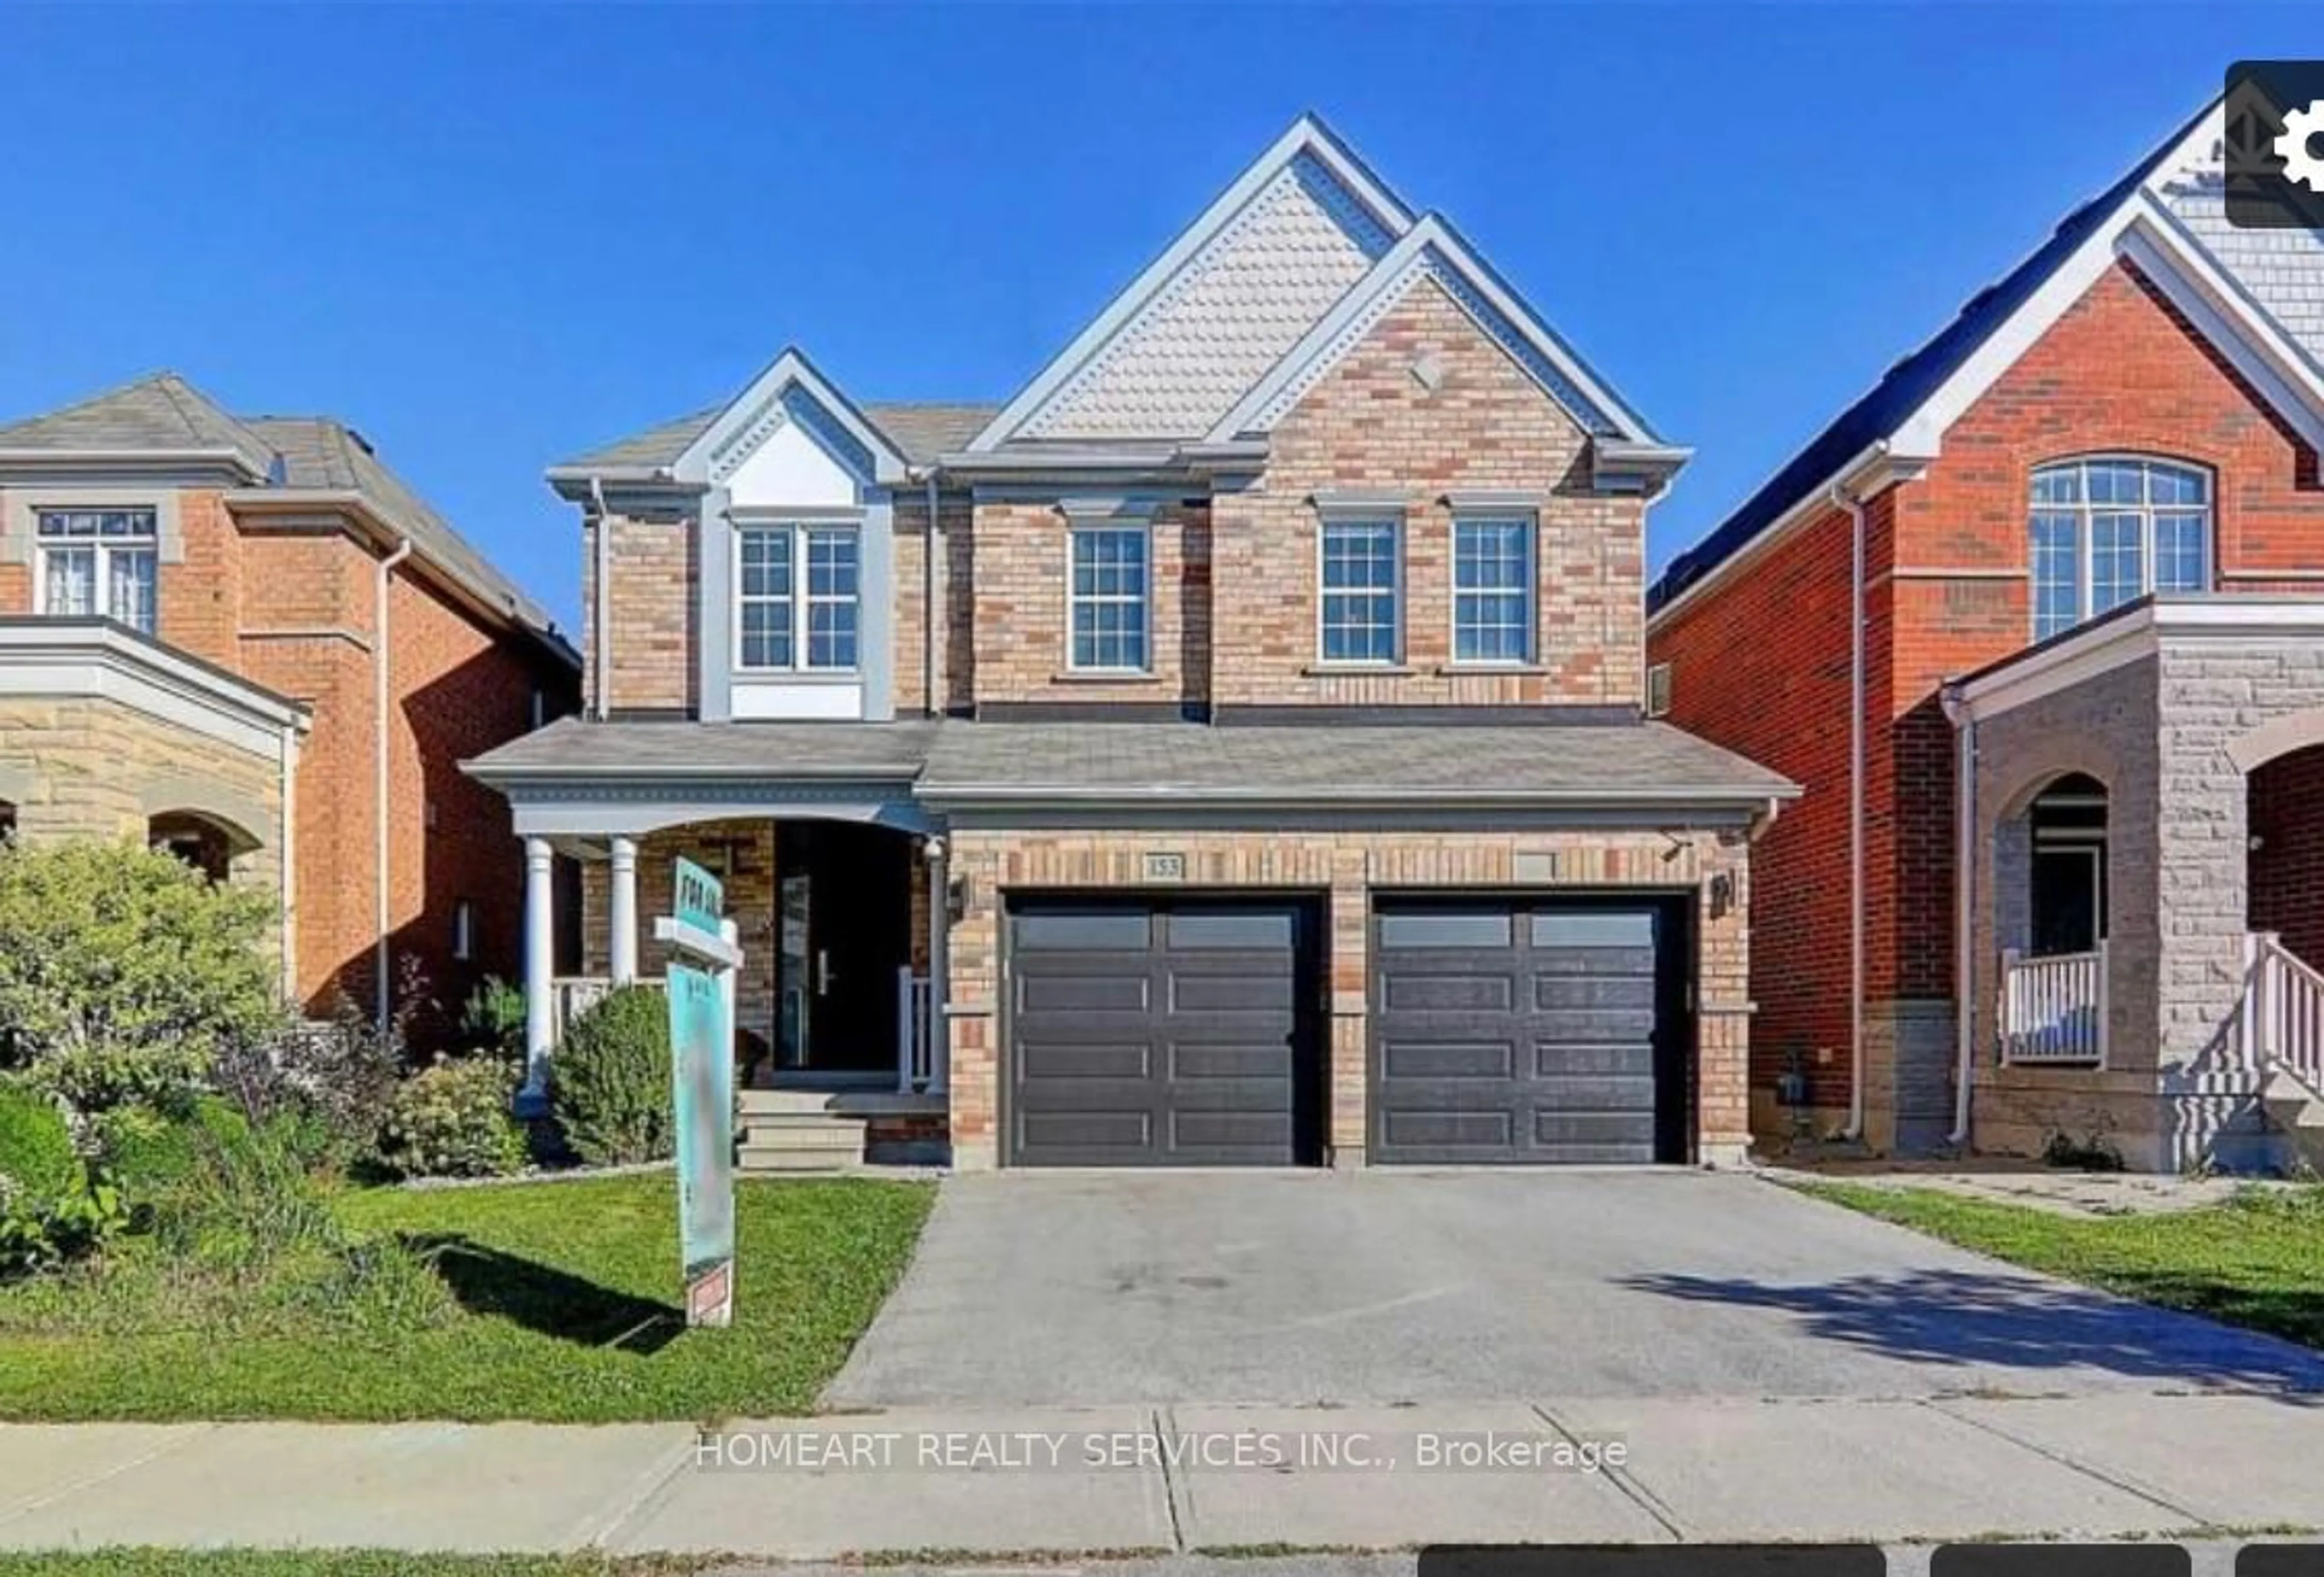 Home with brick exterior material for 153 Summerlyn Tr, Bradford West Gwillimbury Ontario L3Z 0E4